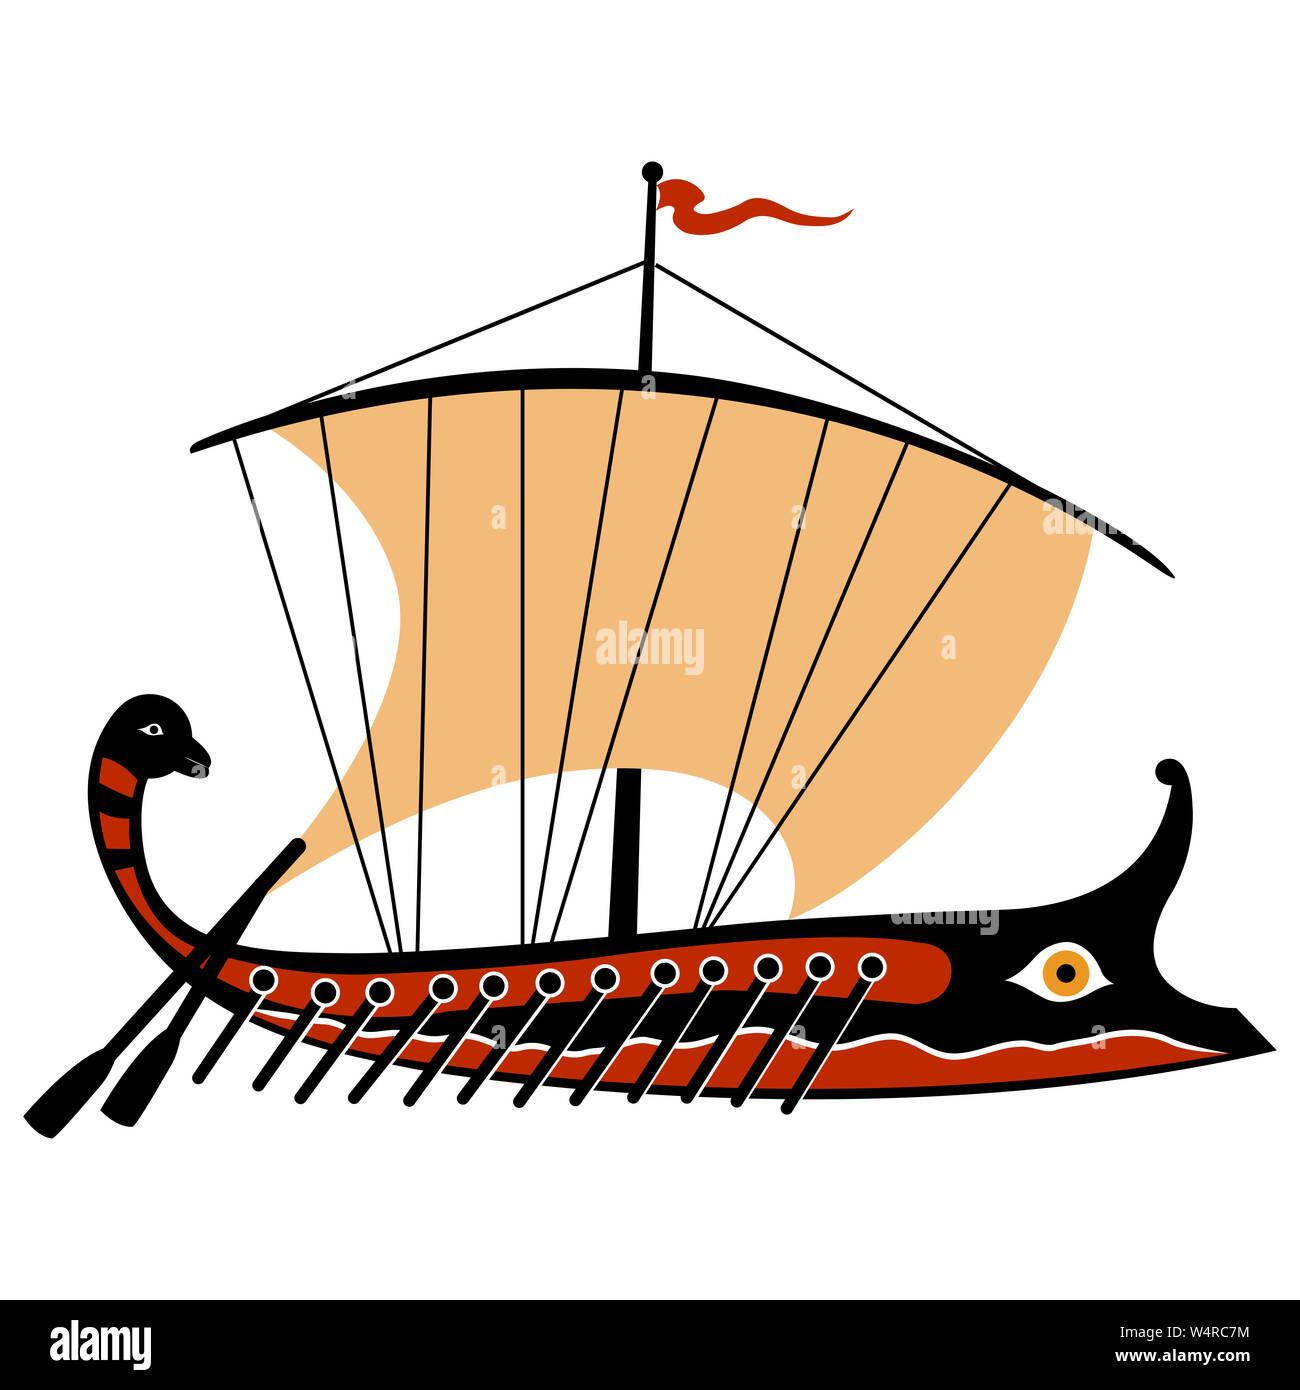 Stylized illustration of an ancient Greek ship. Stock Photo